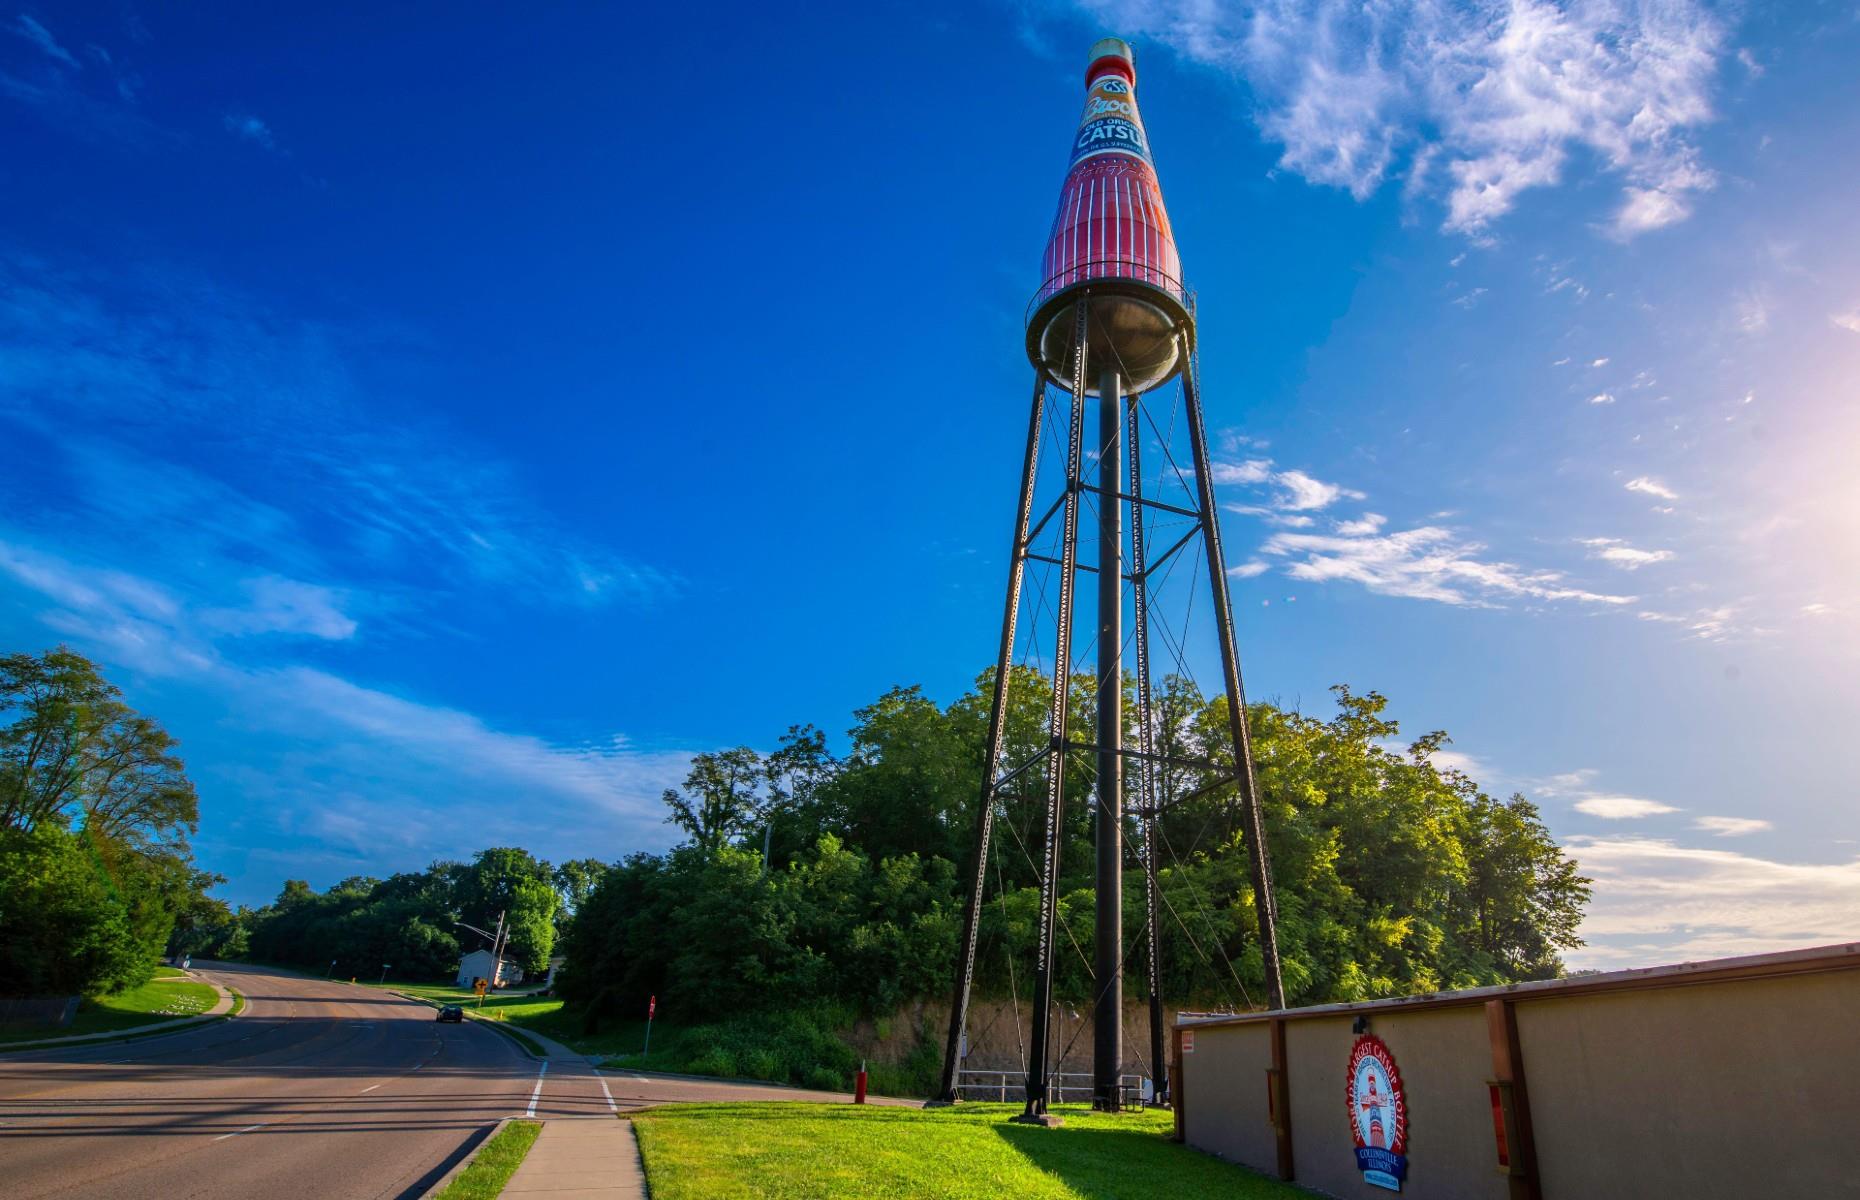 <p>Officially the world’s largest catsup (or ketchup) bottle, <a href="http://www.catsupbottle.com/"><span>this landmark</span></a> just outside Collinsville is pure, joyful Americana. It was built in 1949 to supply water to the nearby Brooks ketchup factory and was saved from demolition in the 1990s. It’s now owned by a group of volunteers dedicated to its preservation and has been resorted and added to the National Register of Historic Places.</p>